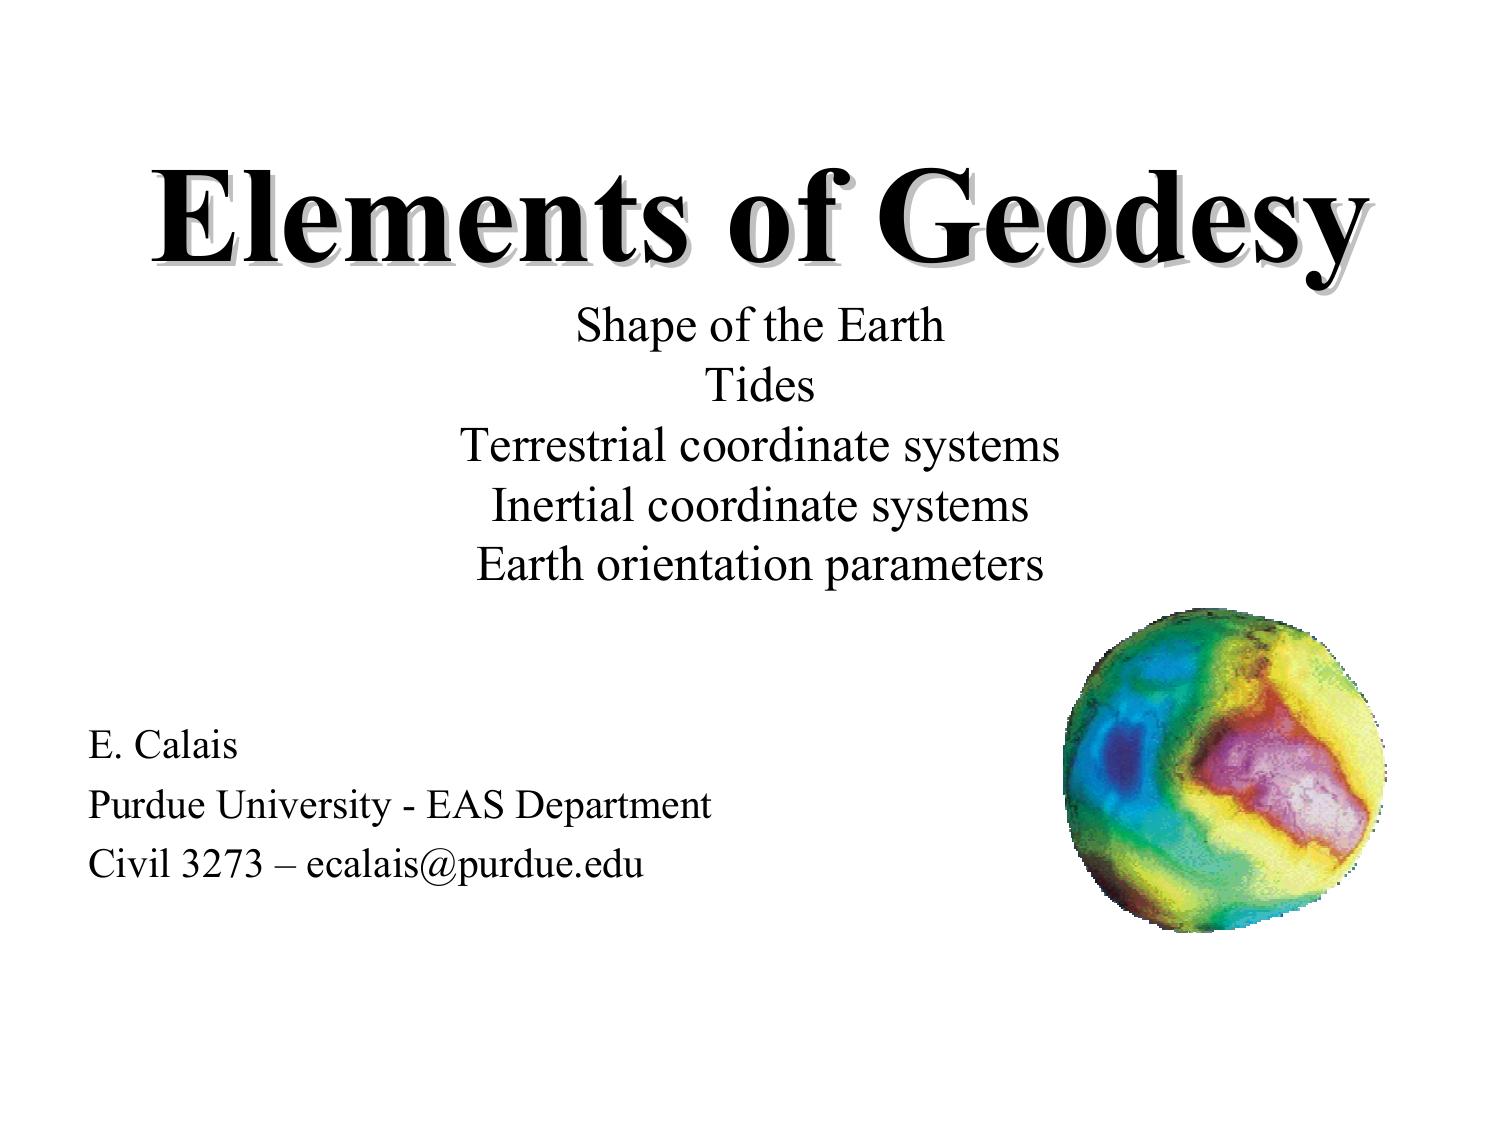 Elements of Geodesy: The shape of the Earth